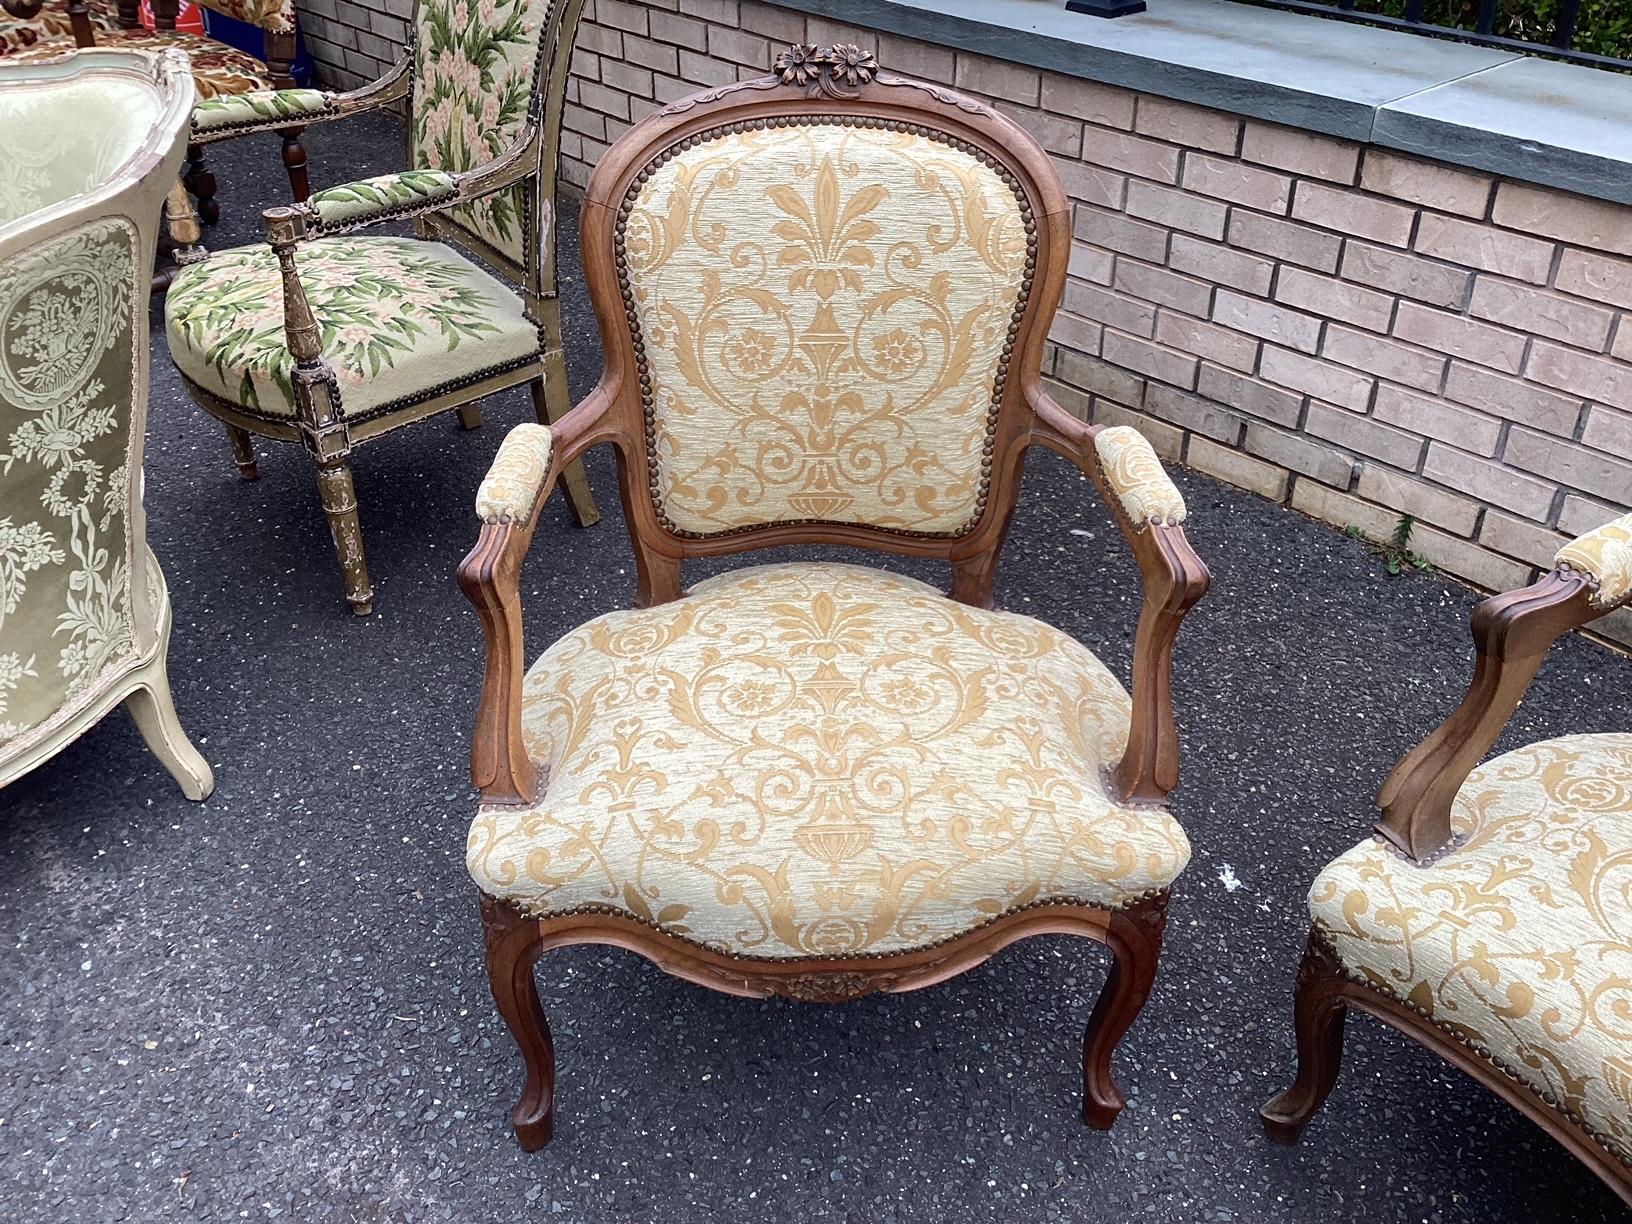 Elegant 3 piece salon set ensemble having 2 armchairs and a lovely settee. The frames are made of walnut and feature delicate carvings on the upper crest at the bottom of the frame. The flowers resemble daisies, which is unusual. The upholstery is